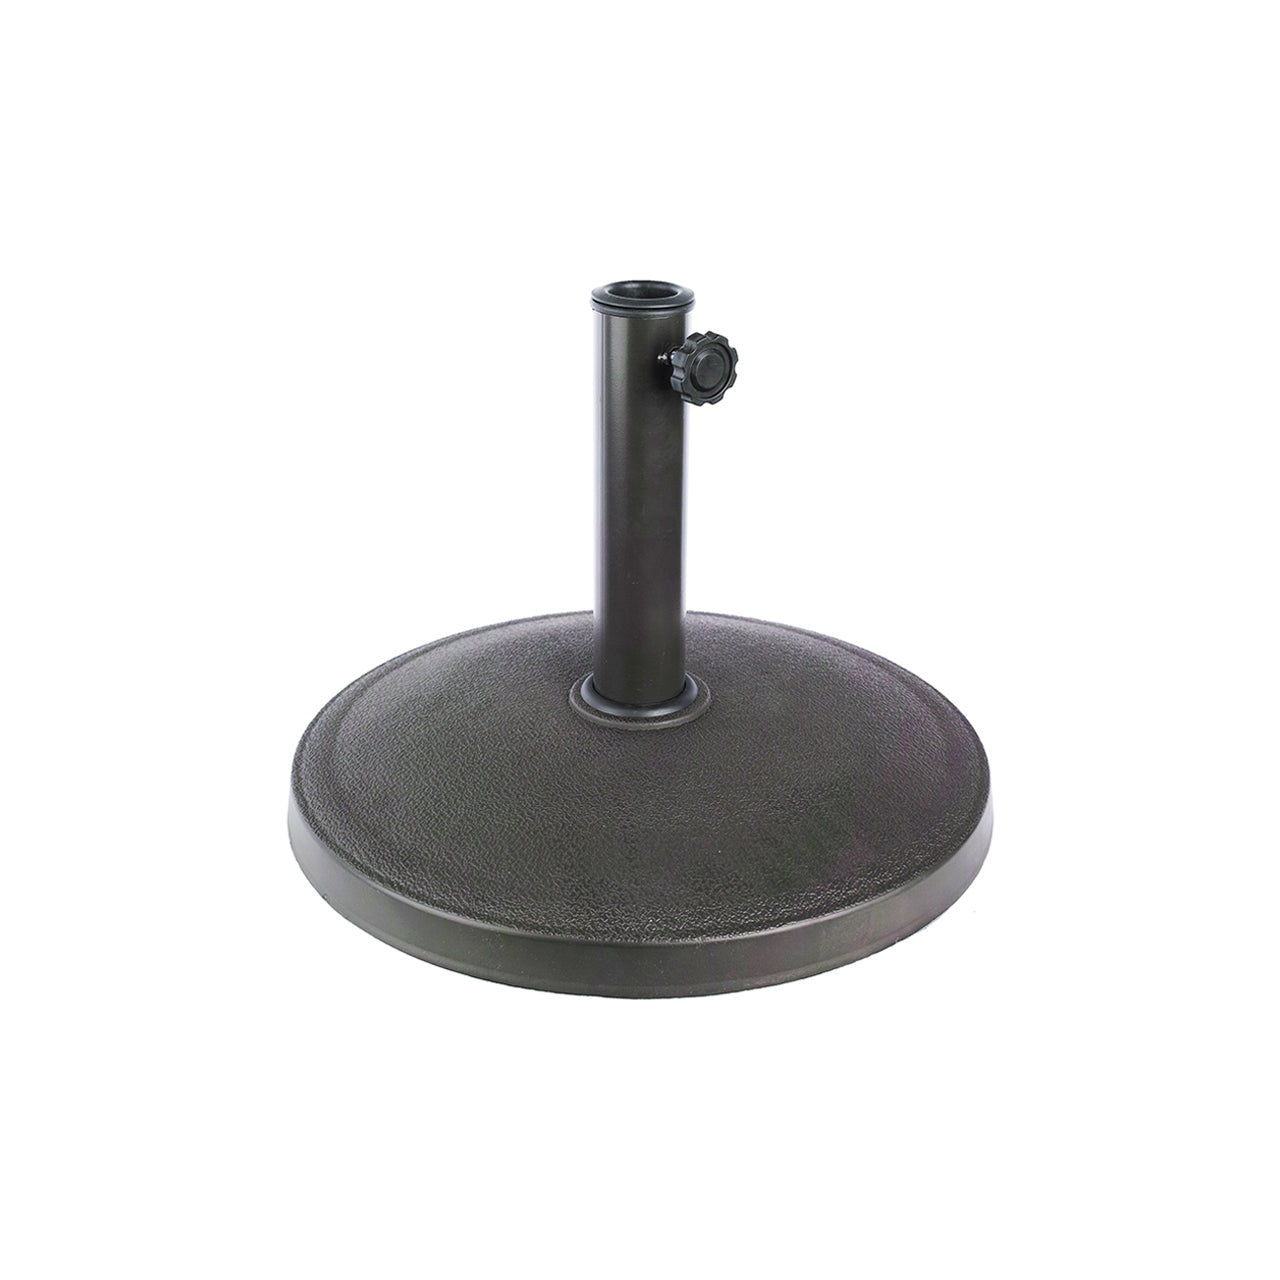 Bliss Outdoors Heavy-Duty Umbrella Base in the classsic variation.